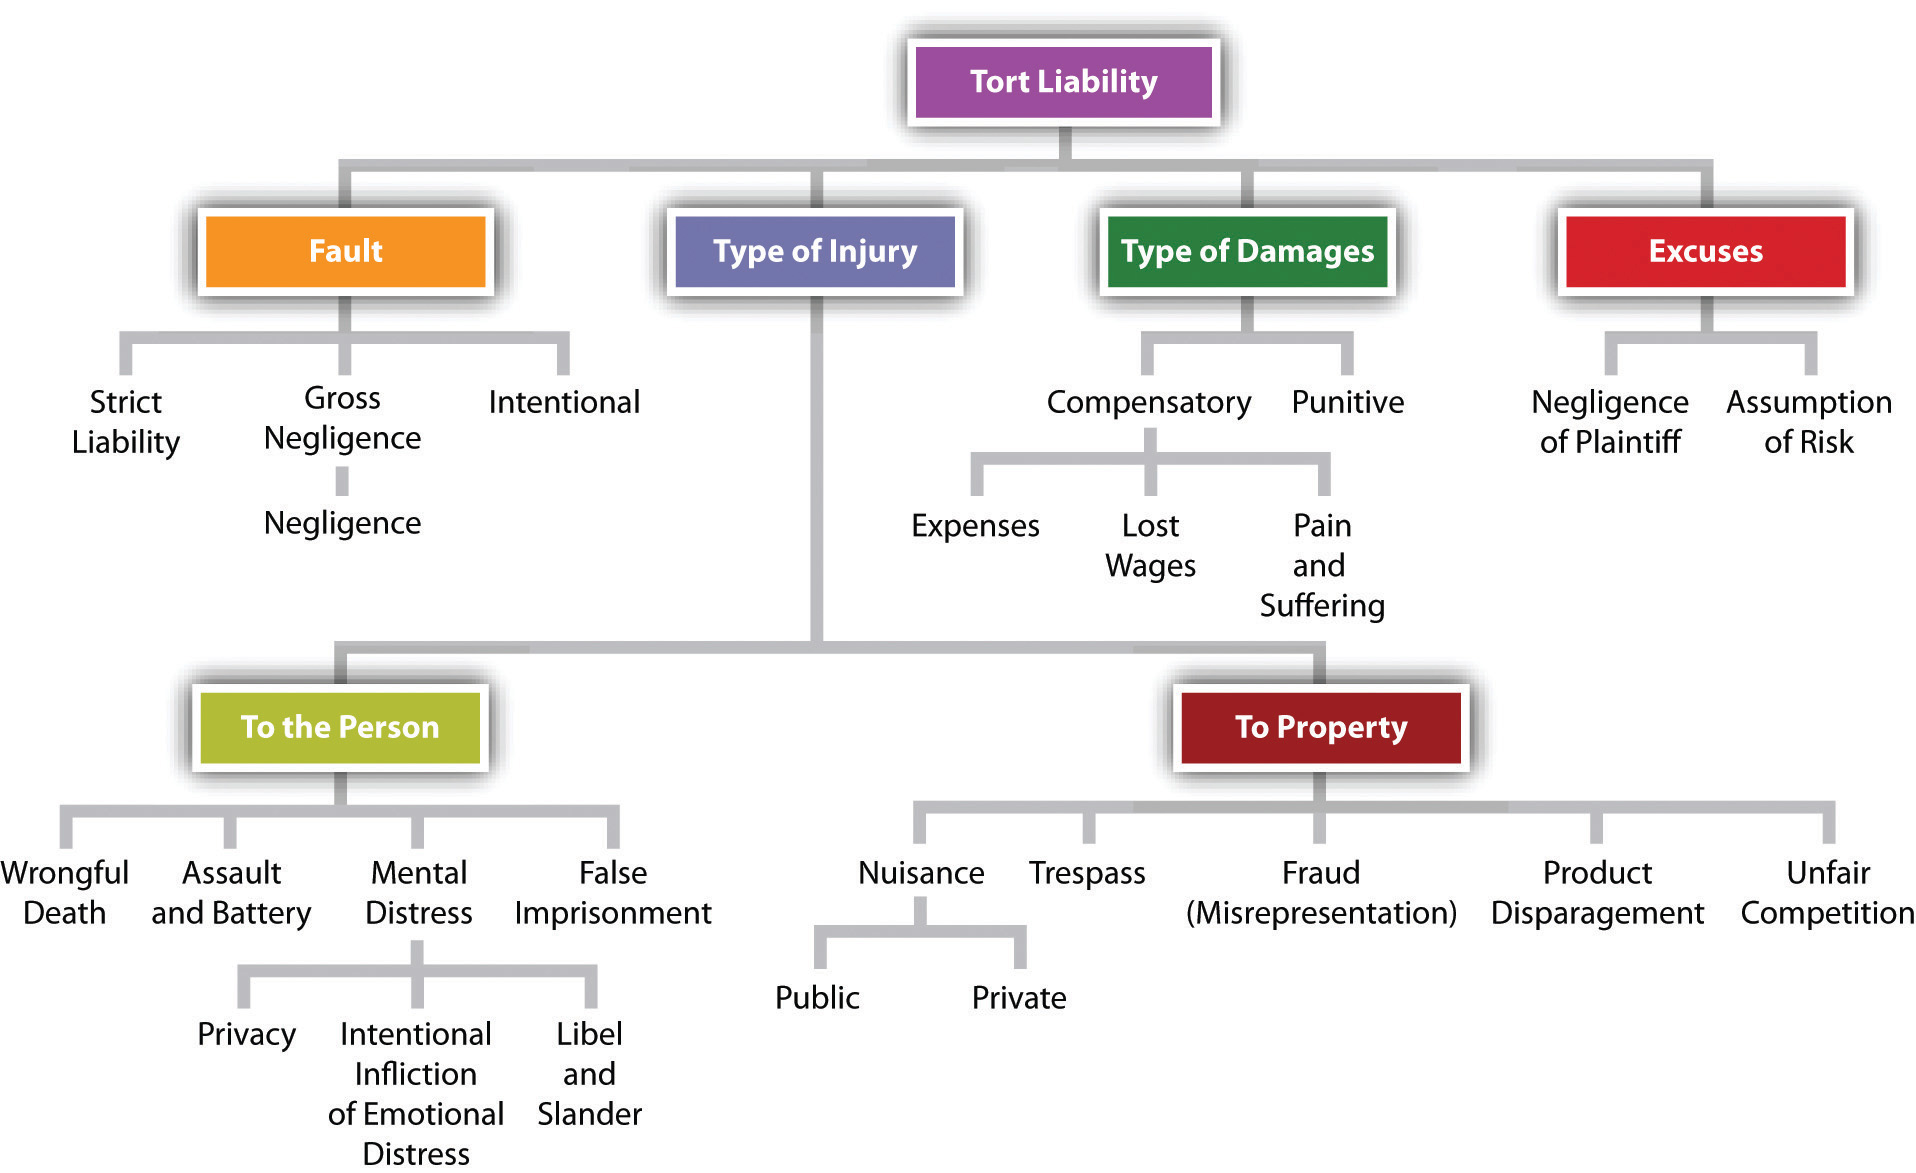 Tort liability has many dimensions. There are four general categories: Fault, type of injury, types of damages, and excuses. Fault contains strict liability, gross negligence (which includes negligence), and intentional. There are two types of injury: to the person and to the property. To the person can include wrongful death, assault and battery, mental distress (including privacy, intentional infliction of emotional distress, and libel and slander), and false imprisonment. Injury to property includes nuisance (both public and private), trespass, fraud (misrepresentation), product disparagement, and unfair competition. Types of Damages contains punitive and compensatory (which includes expenses, lost wages, and pain and suffering). Excuses includes negligence of plaintiff and assumption of risk. 